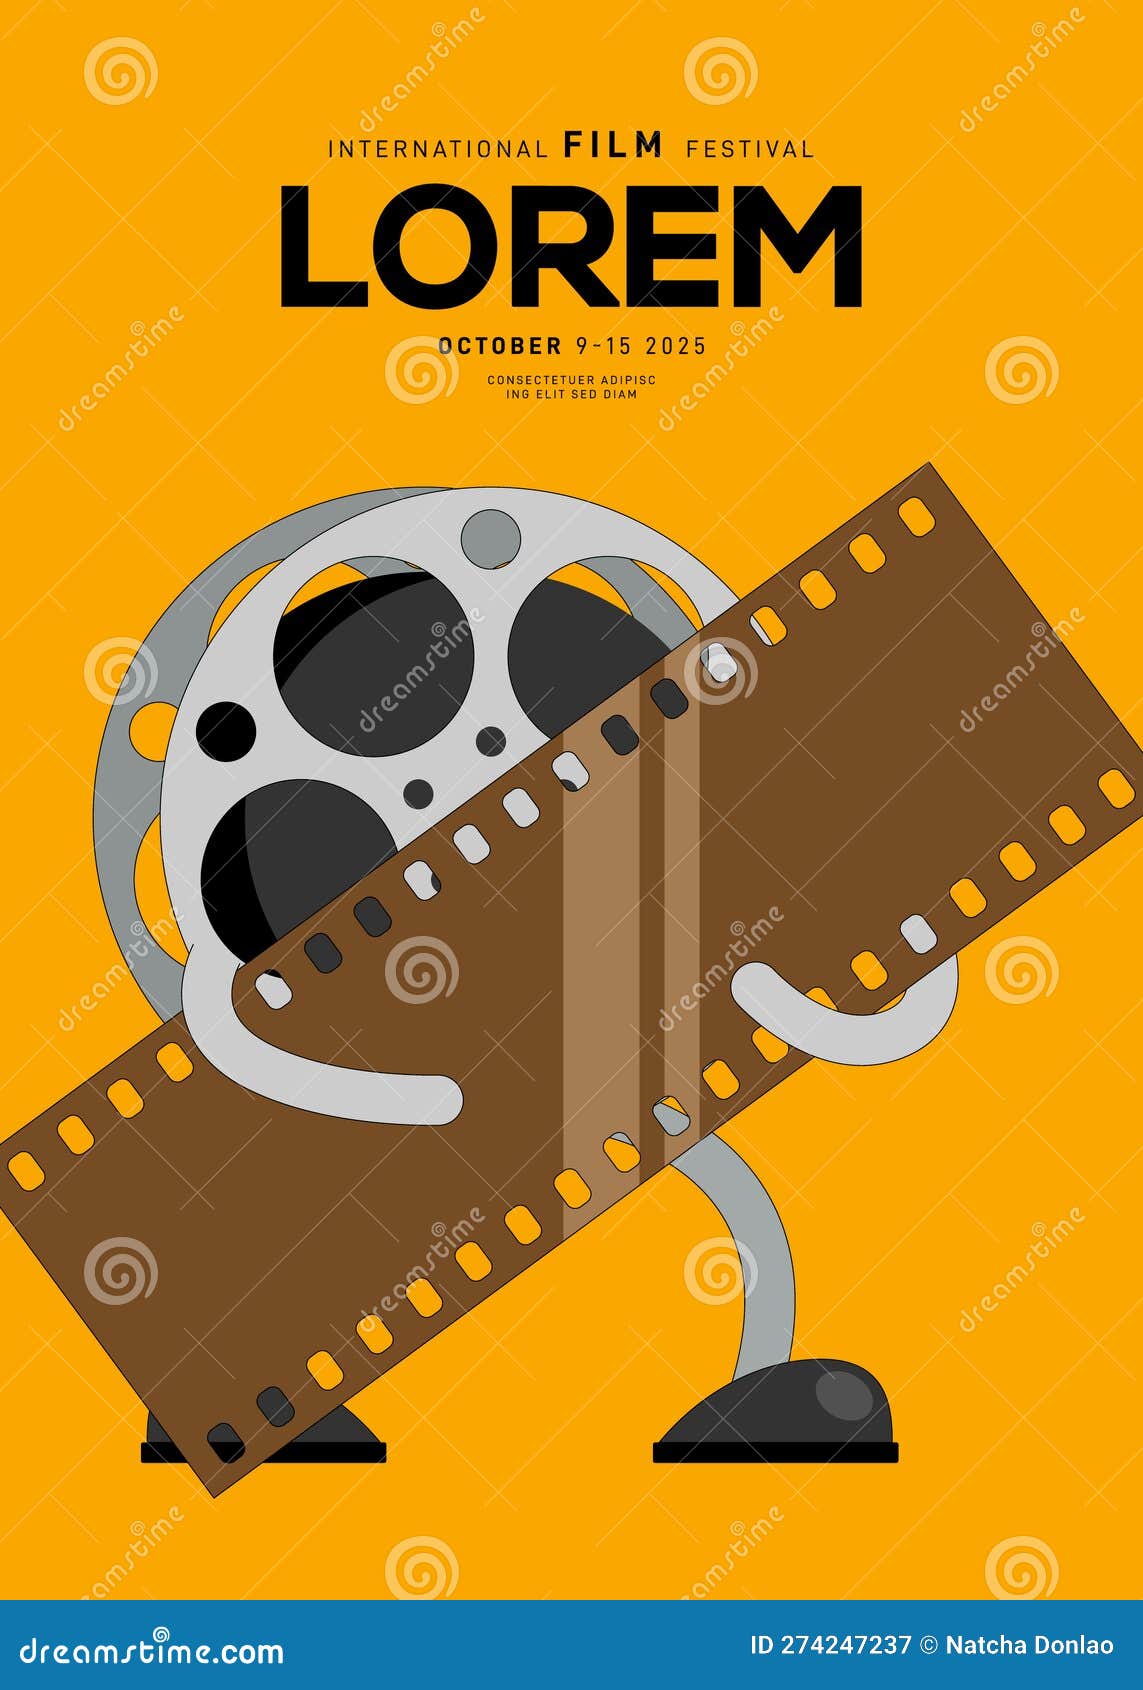 Movie Festival Poster Design Template Background with Vintage Film Reel  Stock Vector - Illustration of cinema, theater: 274247237